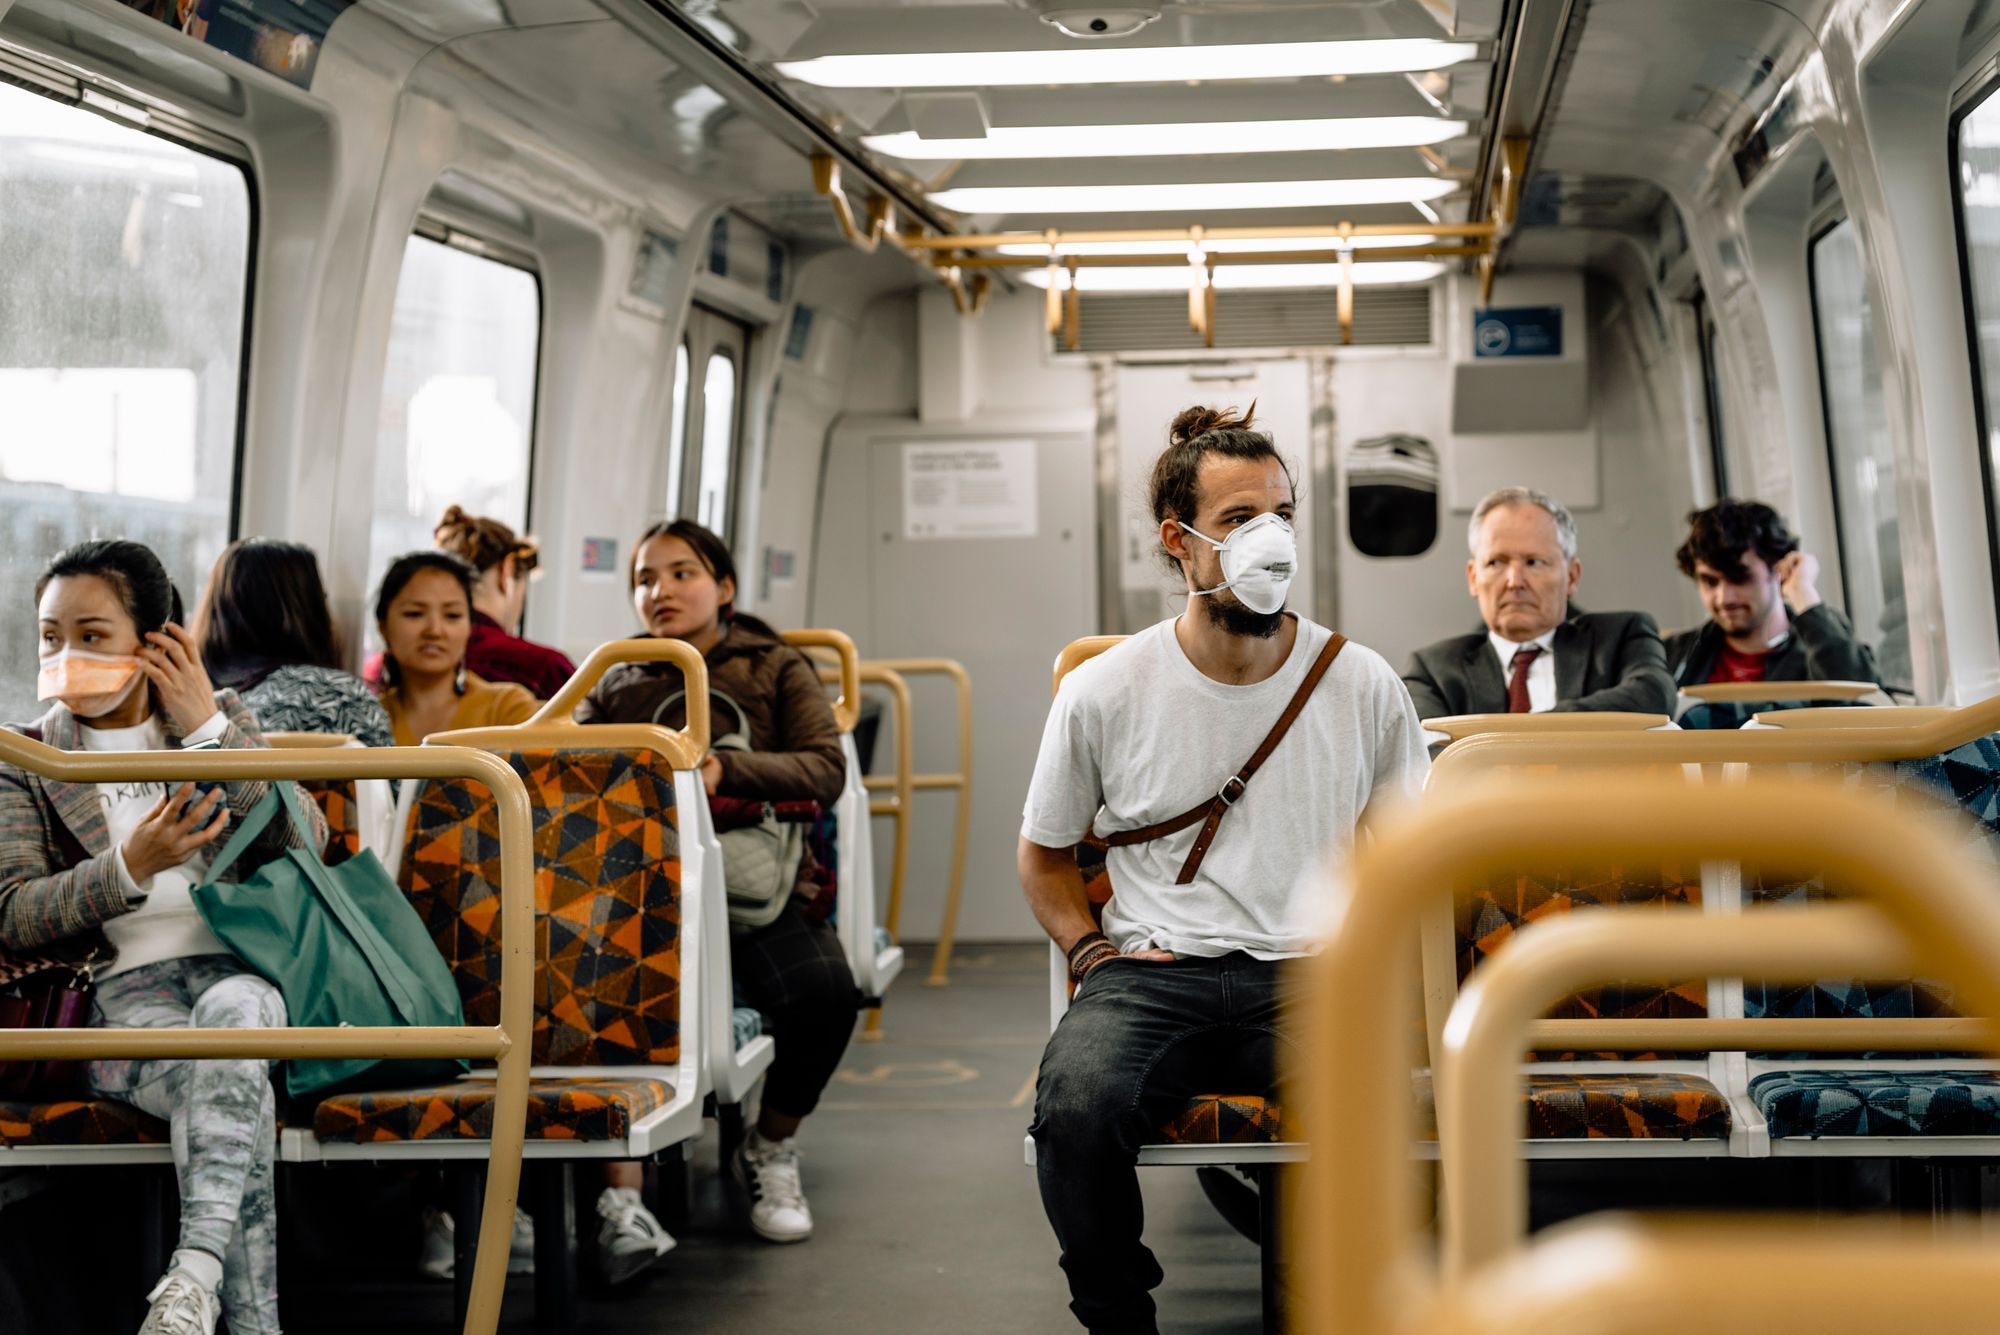 People on a bus, some wearing masks regarding the Vaccine Choice Canada lawsuit filed